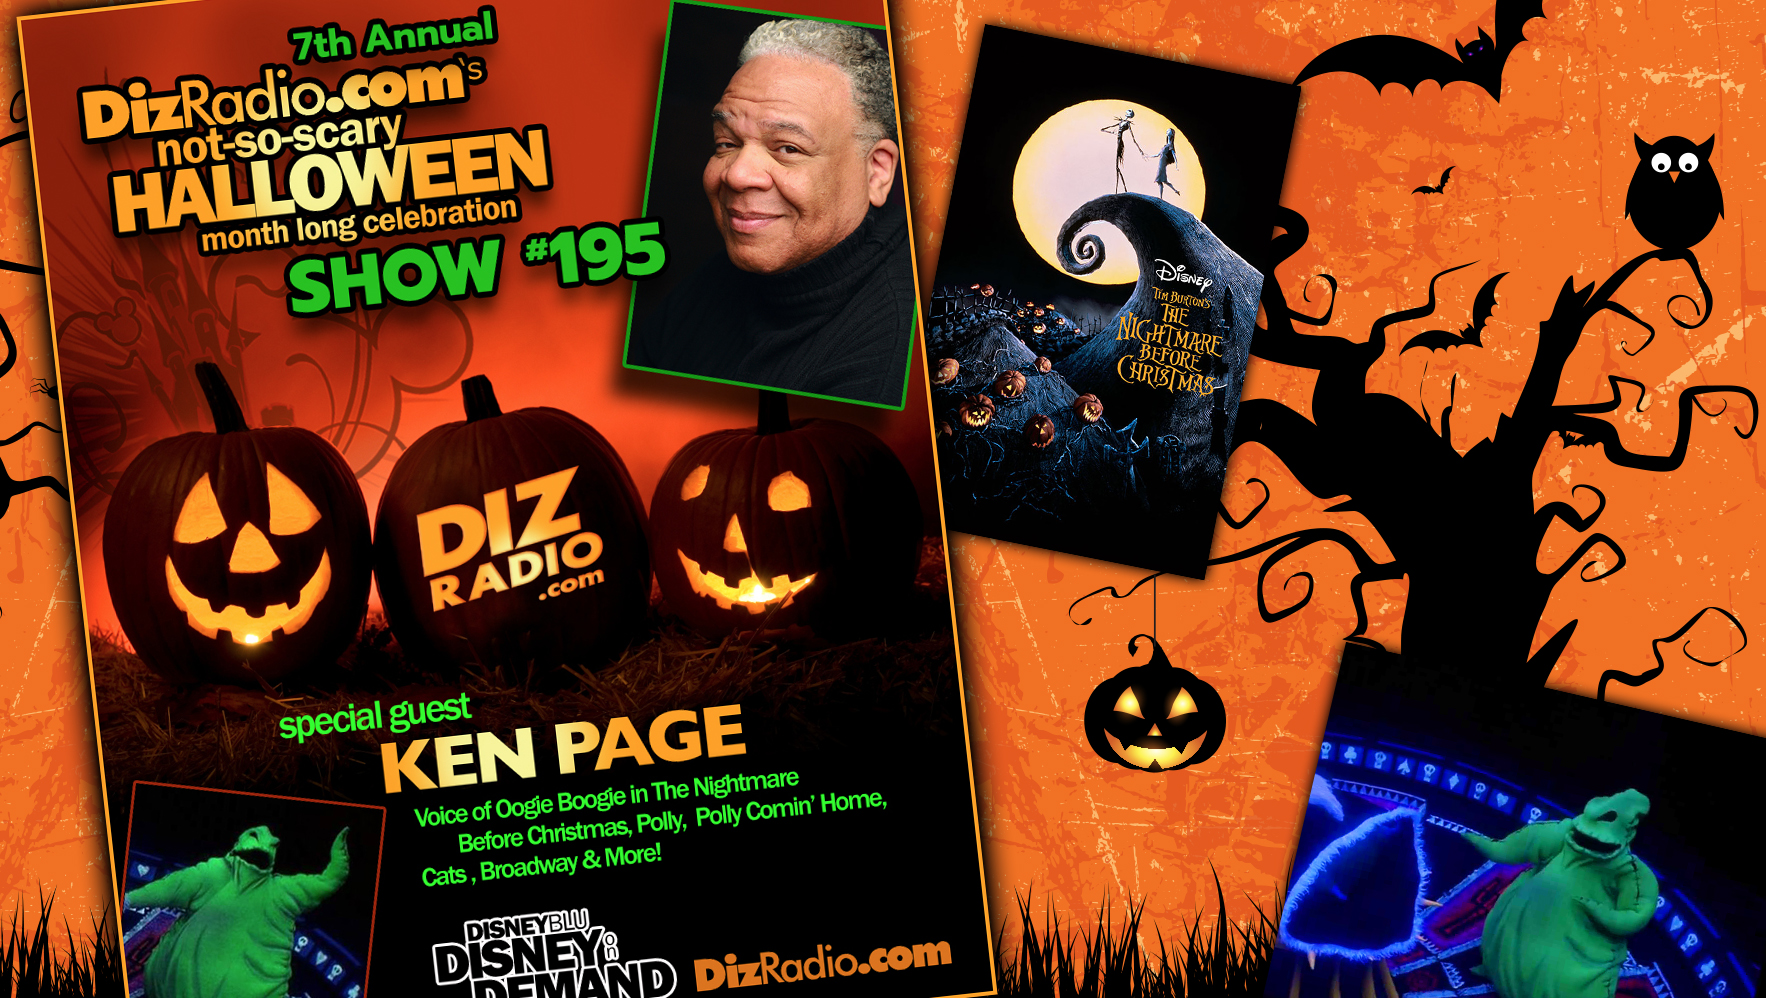 DisneyBlu's DizRadio Disney on Demand Podcast Show #195 w/ Special Guest KEN PAGE (Voice of Oogie Boogie in The Nightmare Before Christmas, Cats, Polly, Polly Comin' Home)